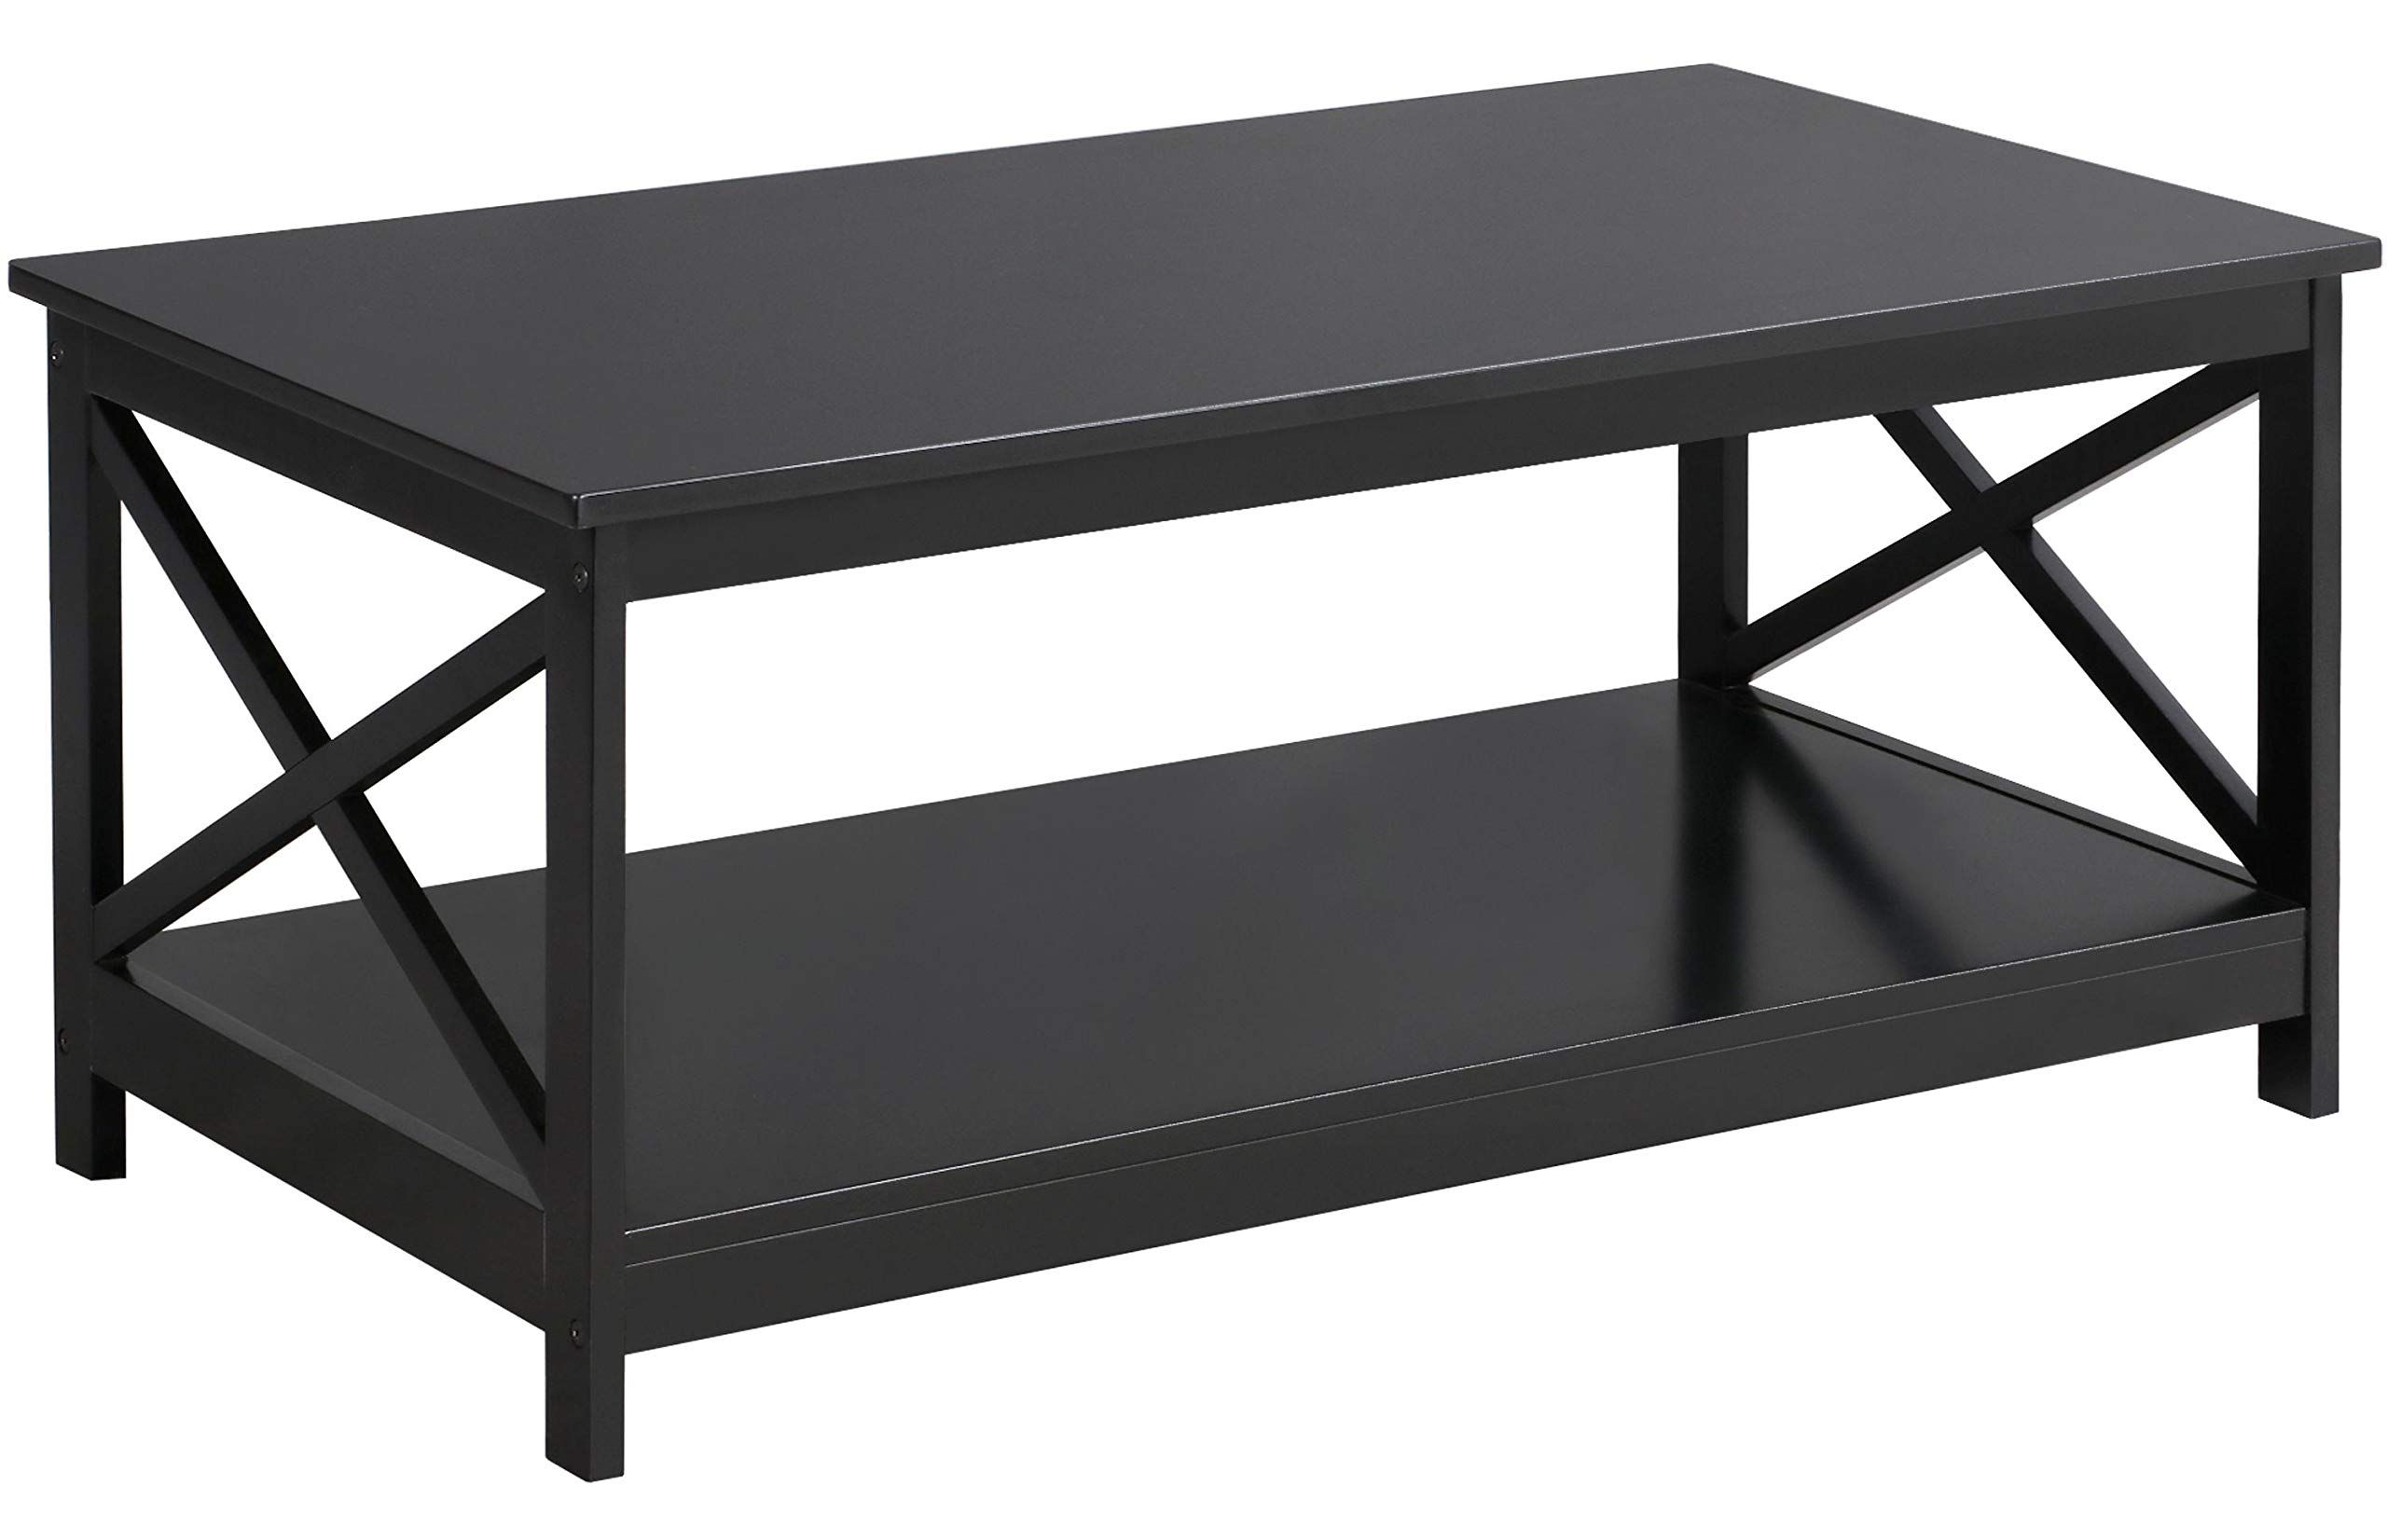 Yaheetech Wood Coffee Table With Storage Shelf For Living Intended For Espresso Wood Storage Console Tables (View 9 of 20)